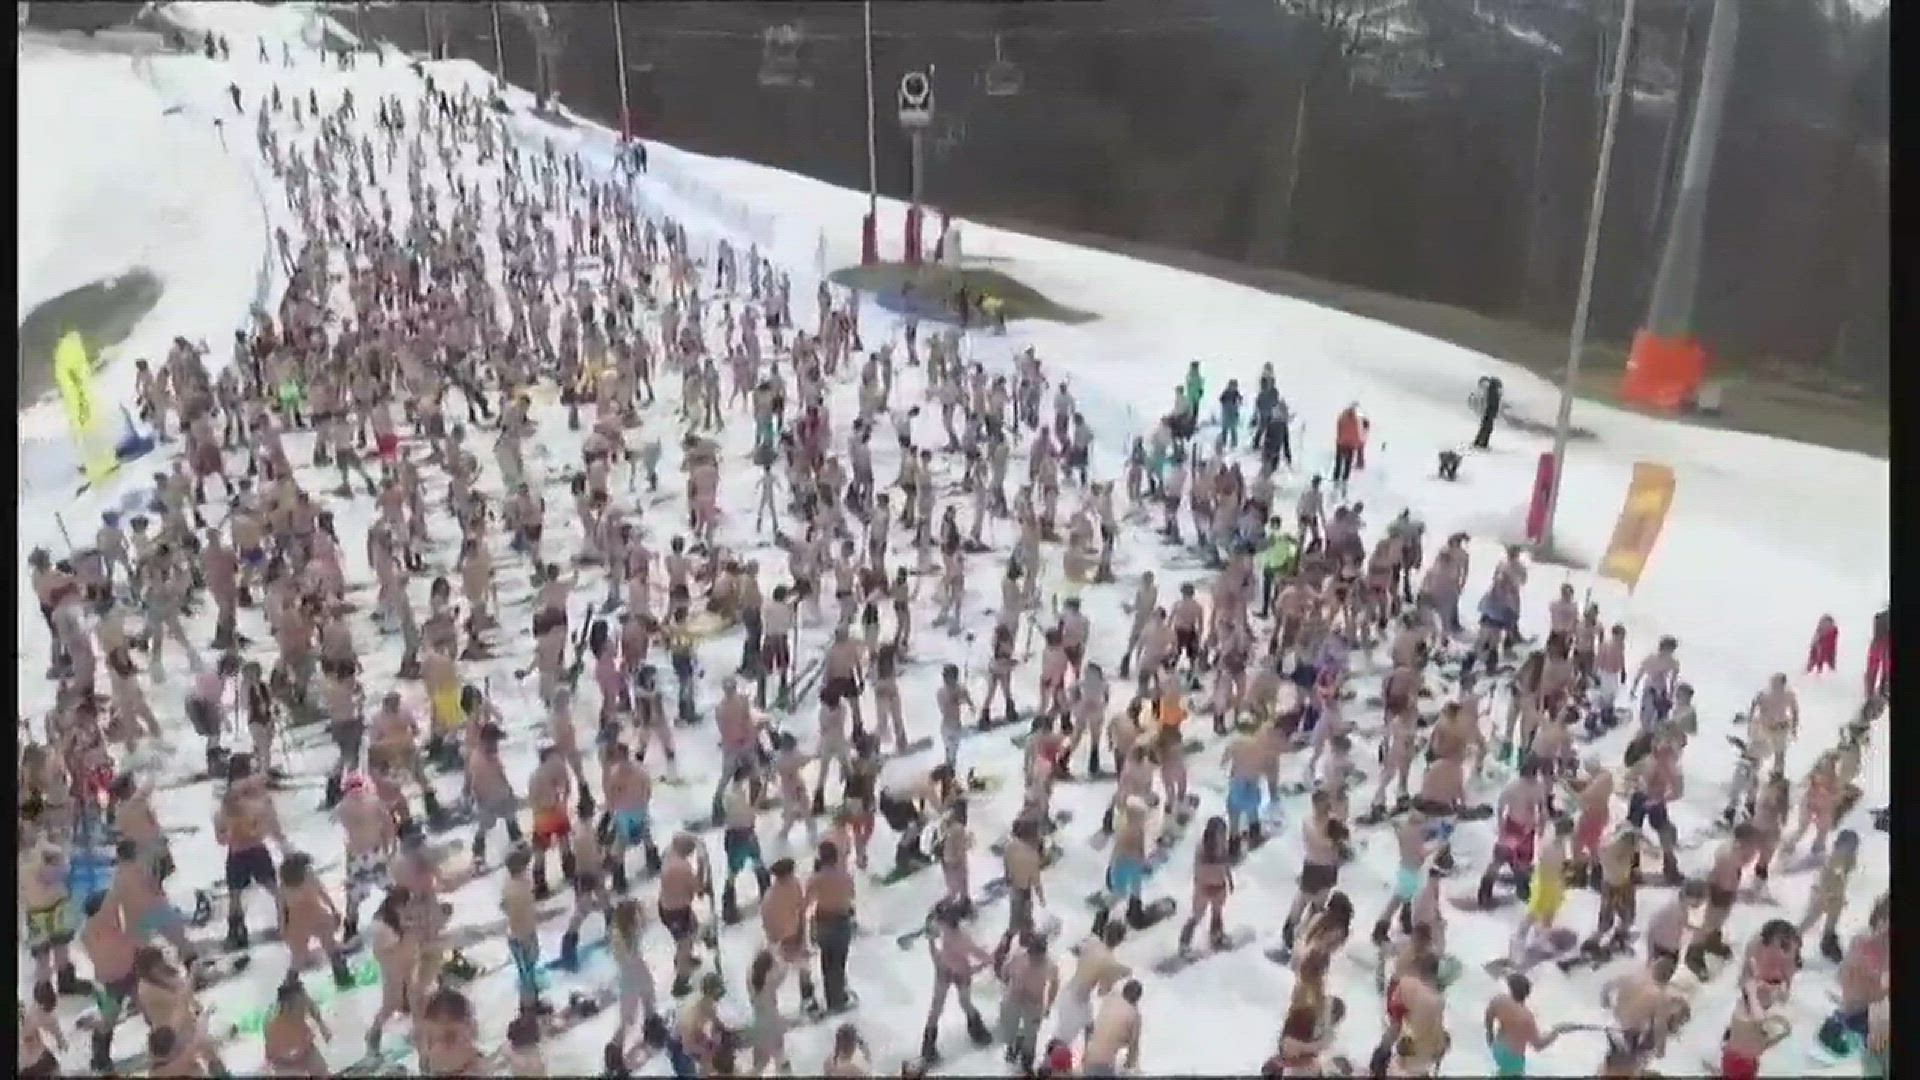 April 9, 2016: More than 1,000 people simultaneously went down the slopes in their bathing suits to break the world record.